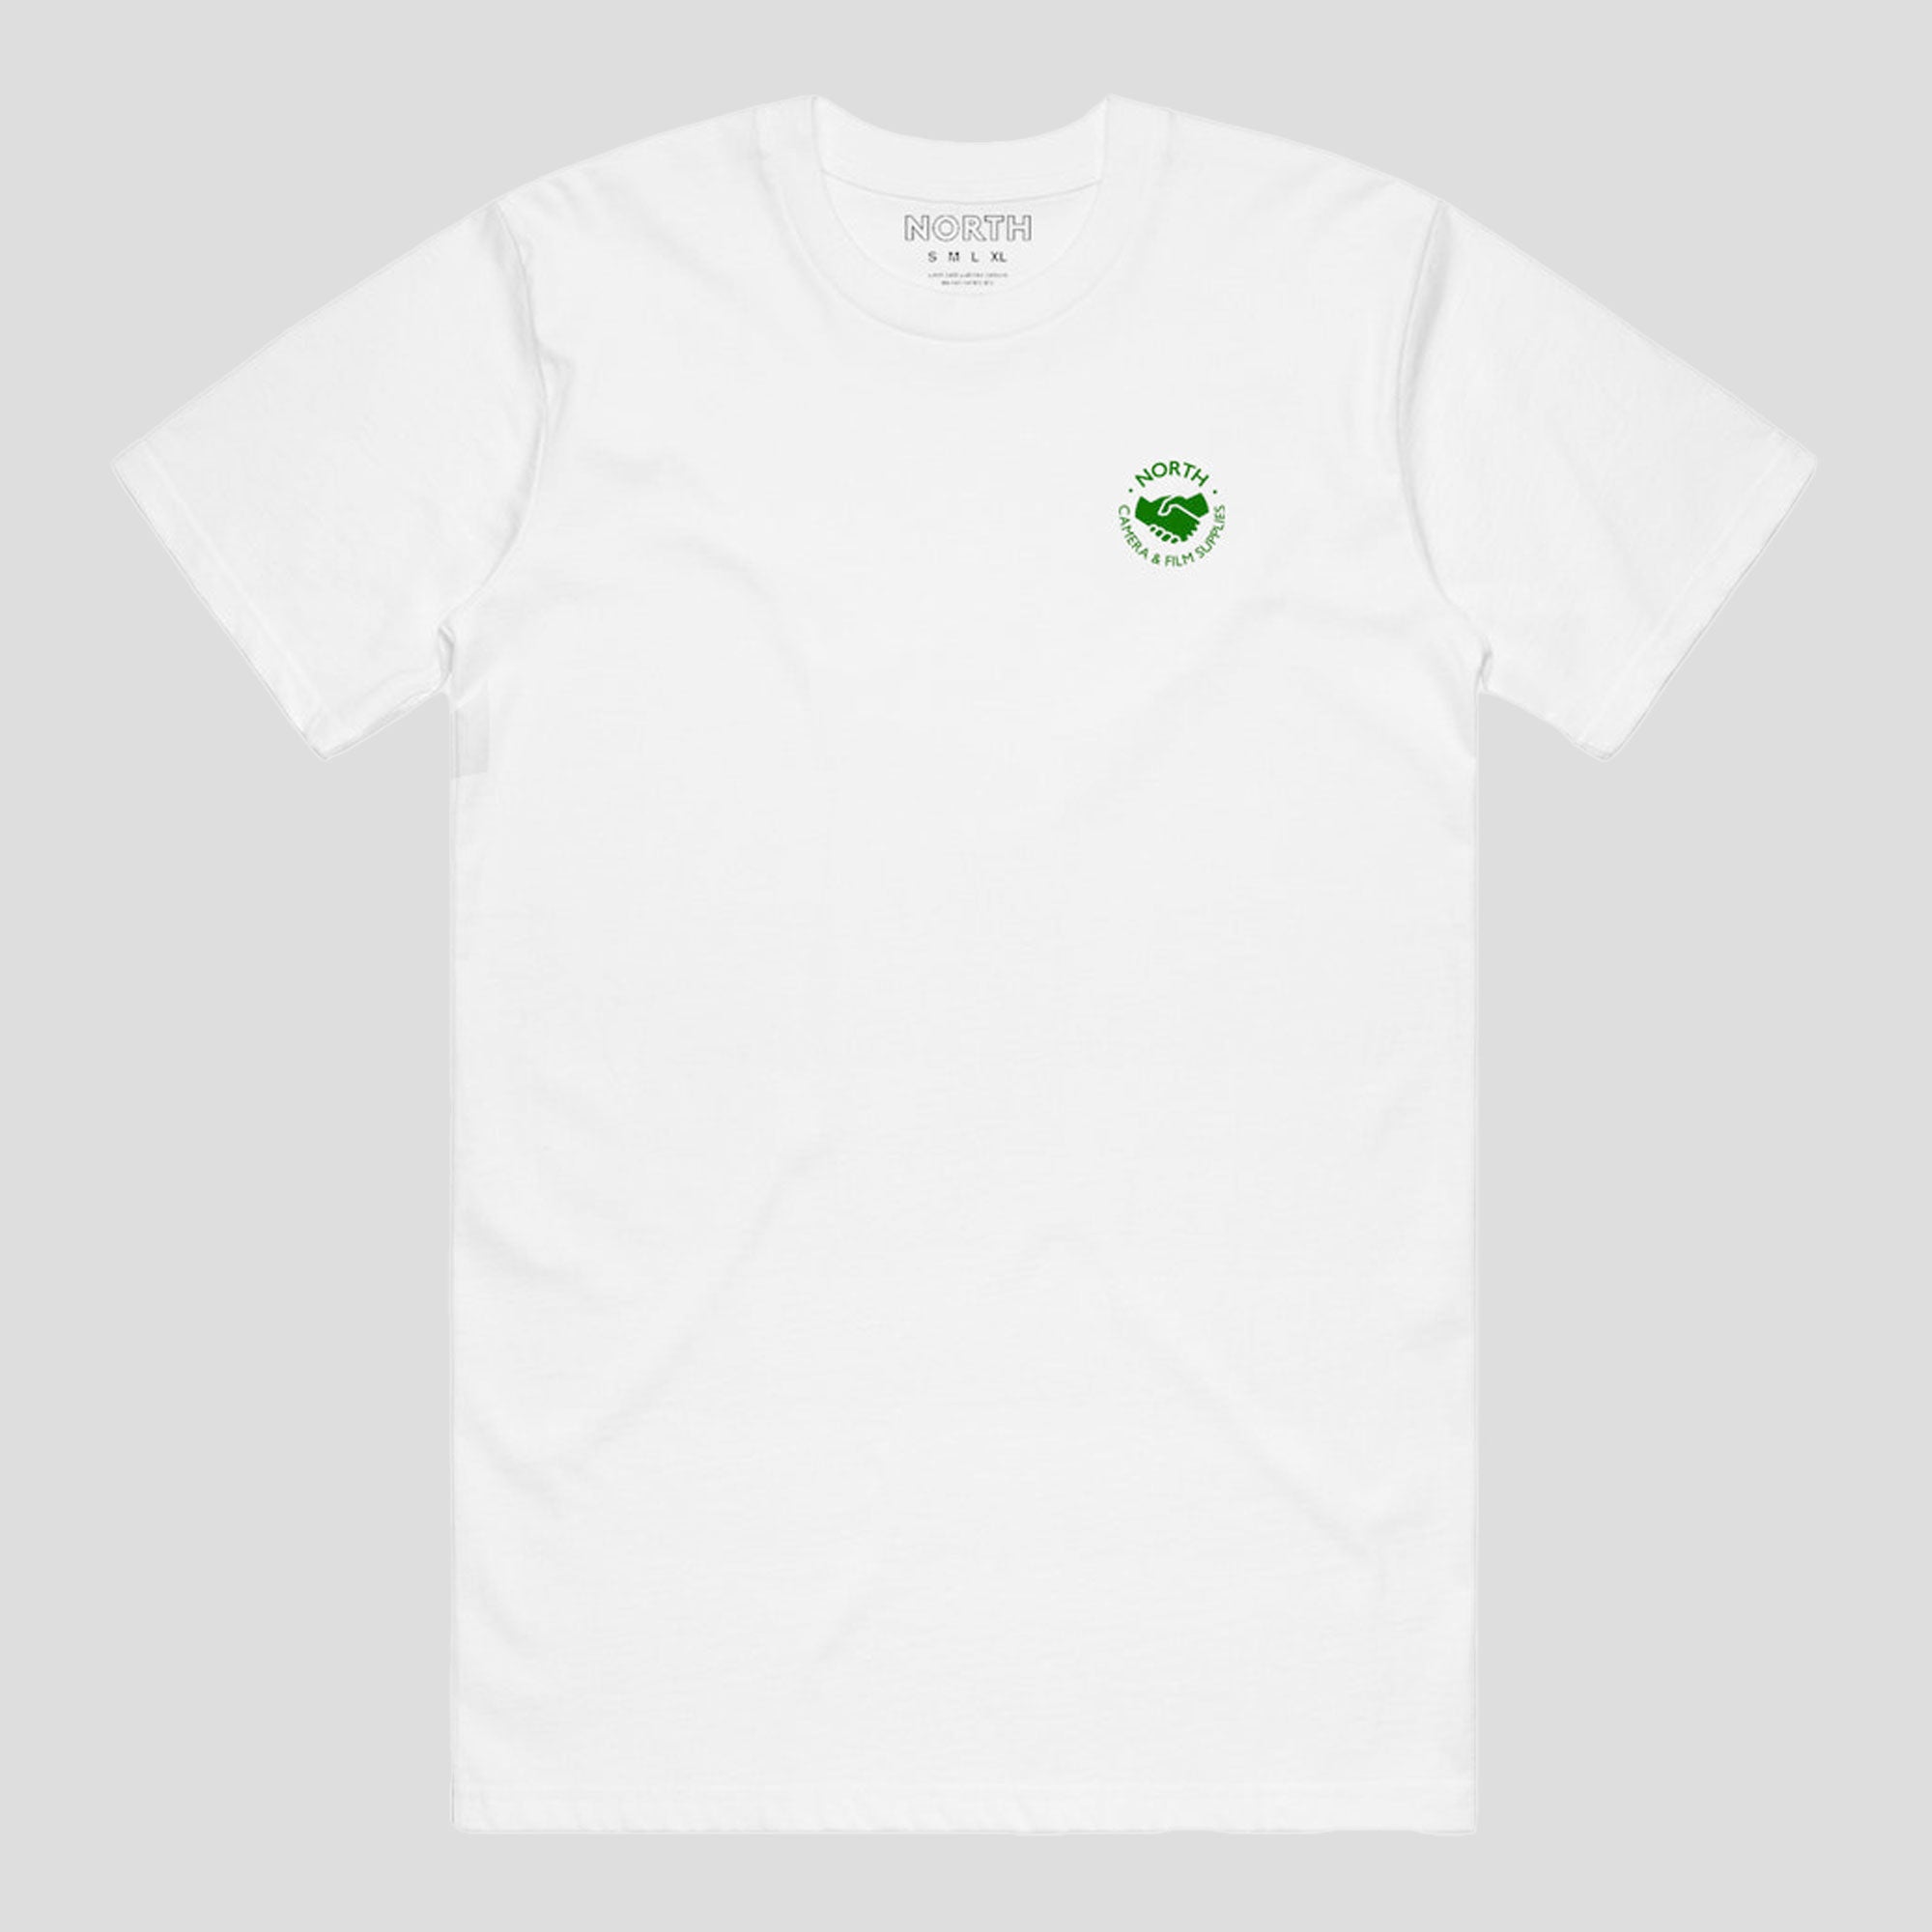 North Supplies Logo Embroidery Tee - White / Green